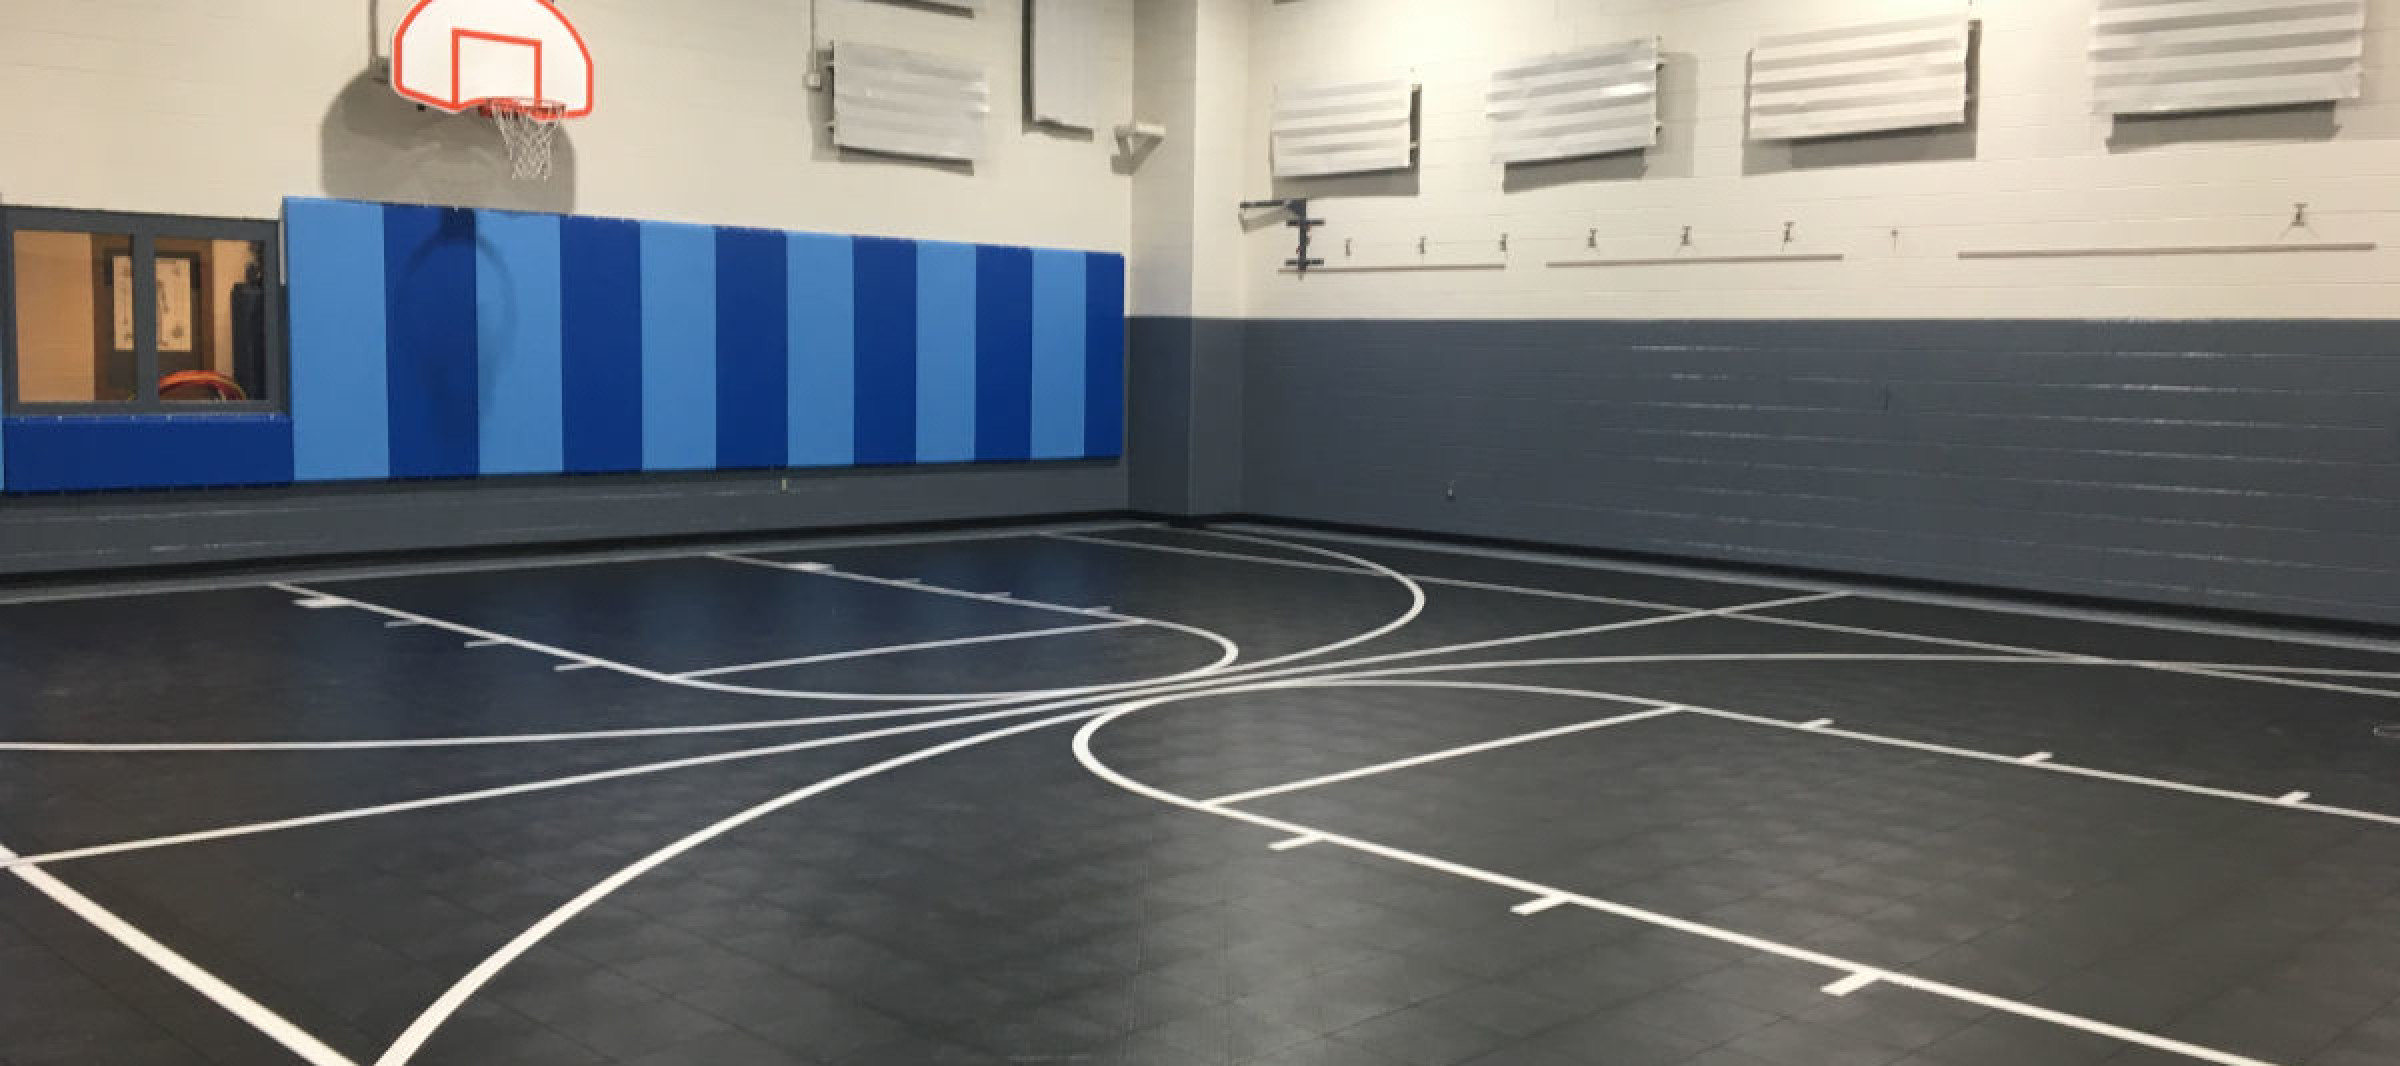 What Are Basketball Gym Floors Made Of Viewfloor co